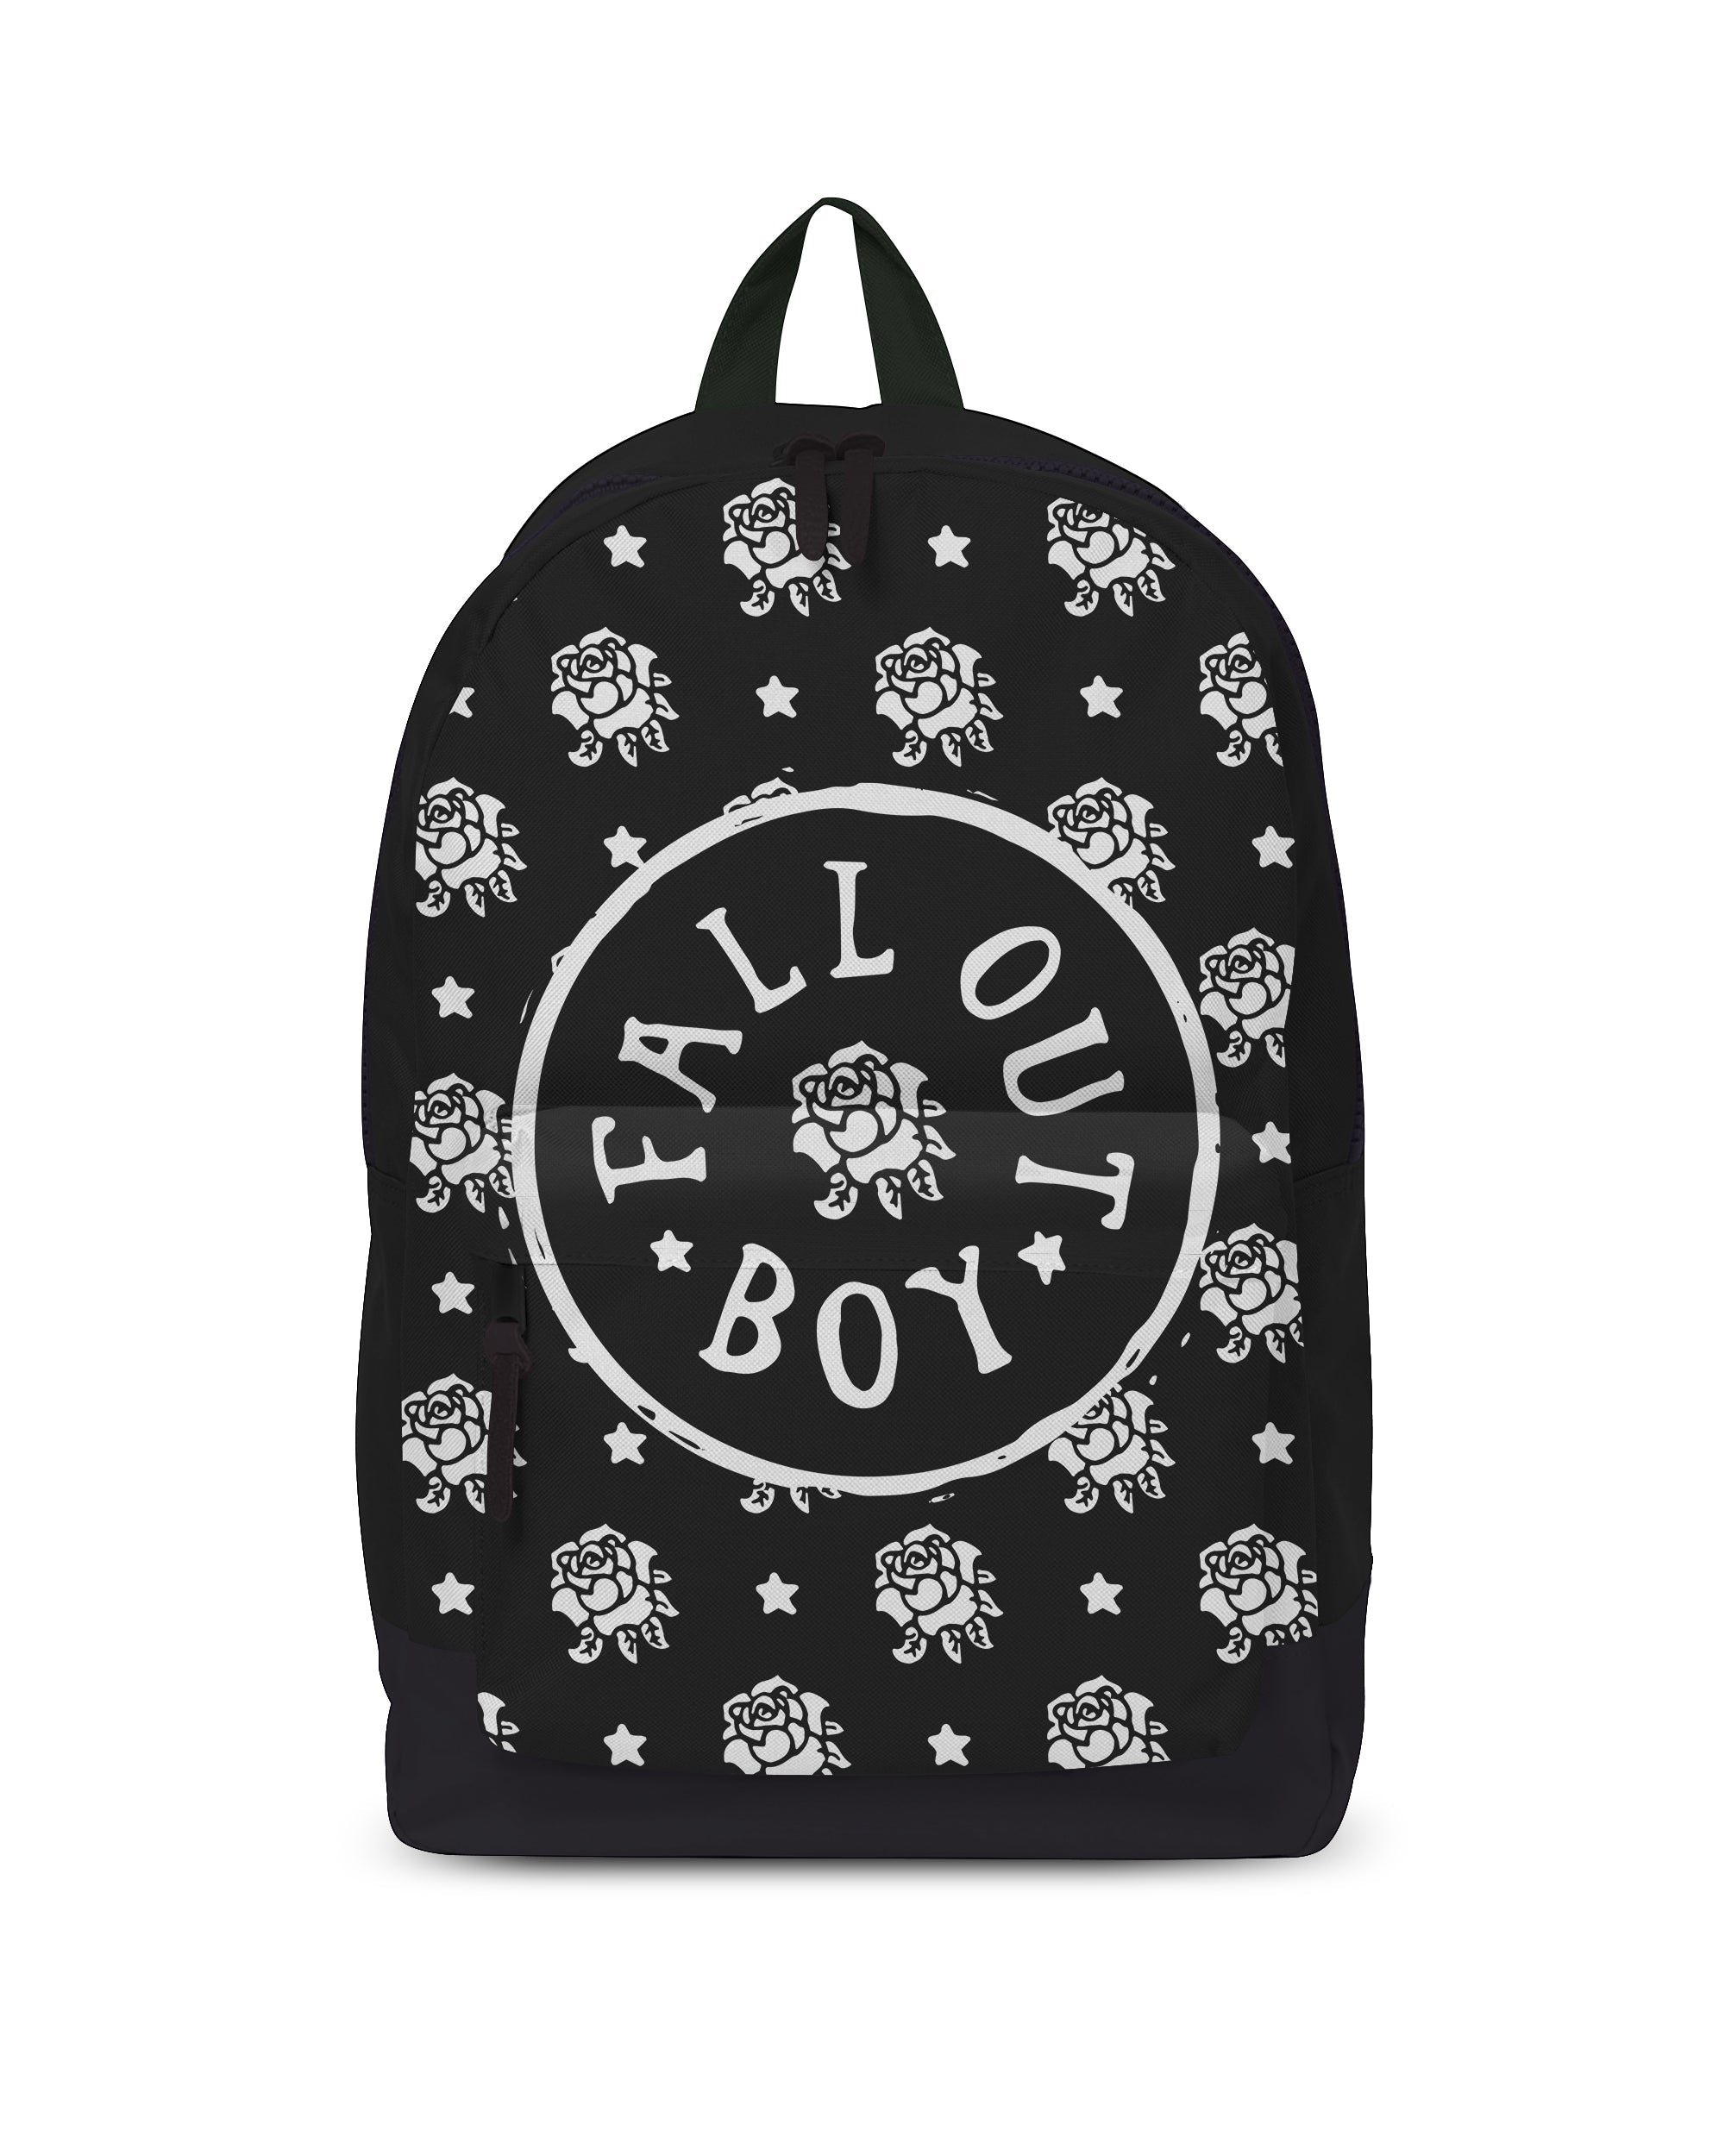 Rocksax Fall Out Boy Backpack - Flowers From £34.99